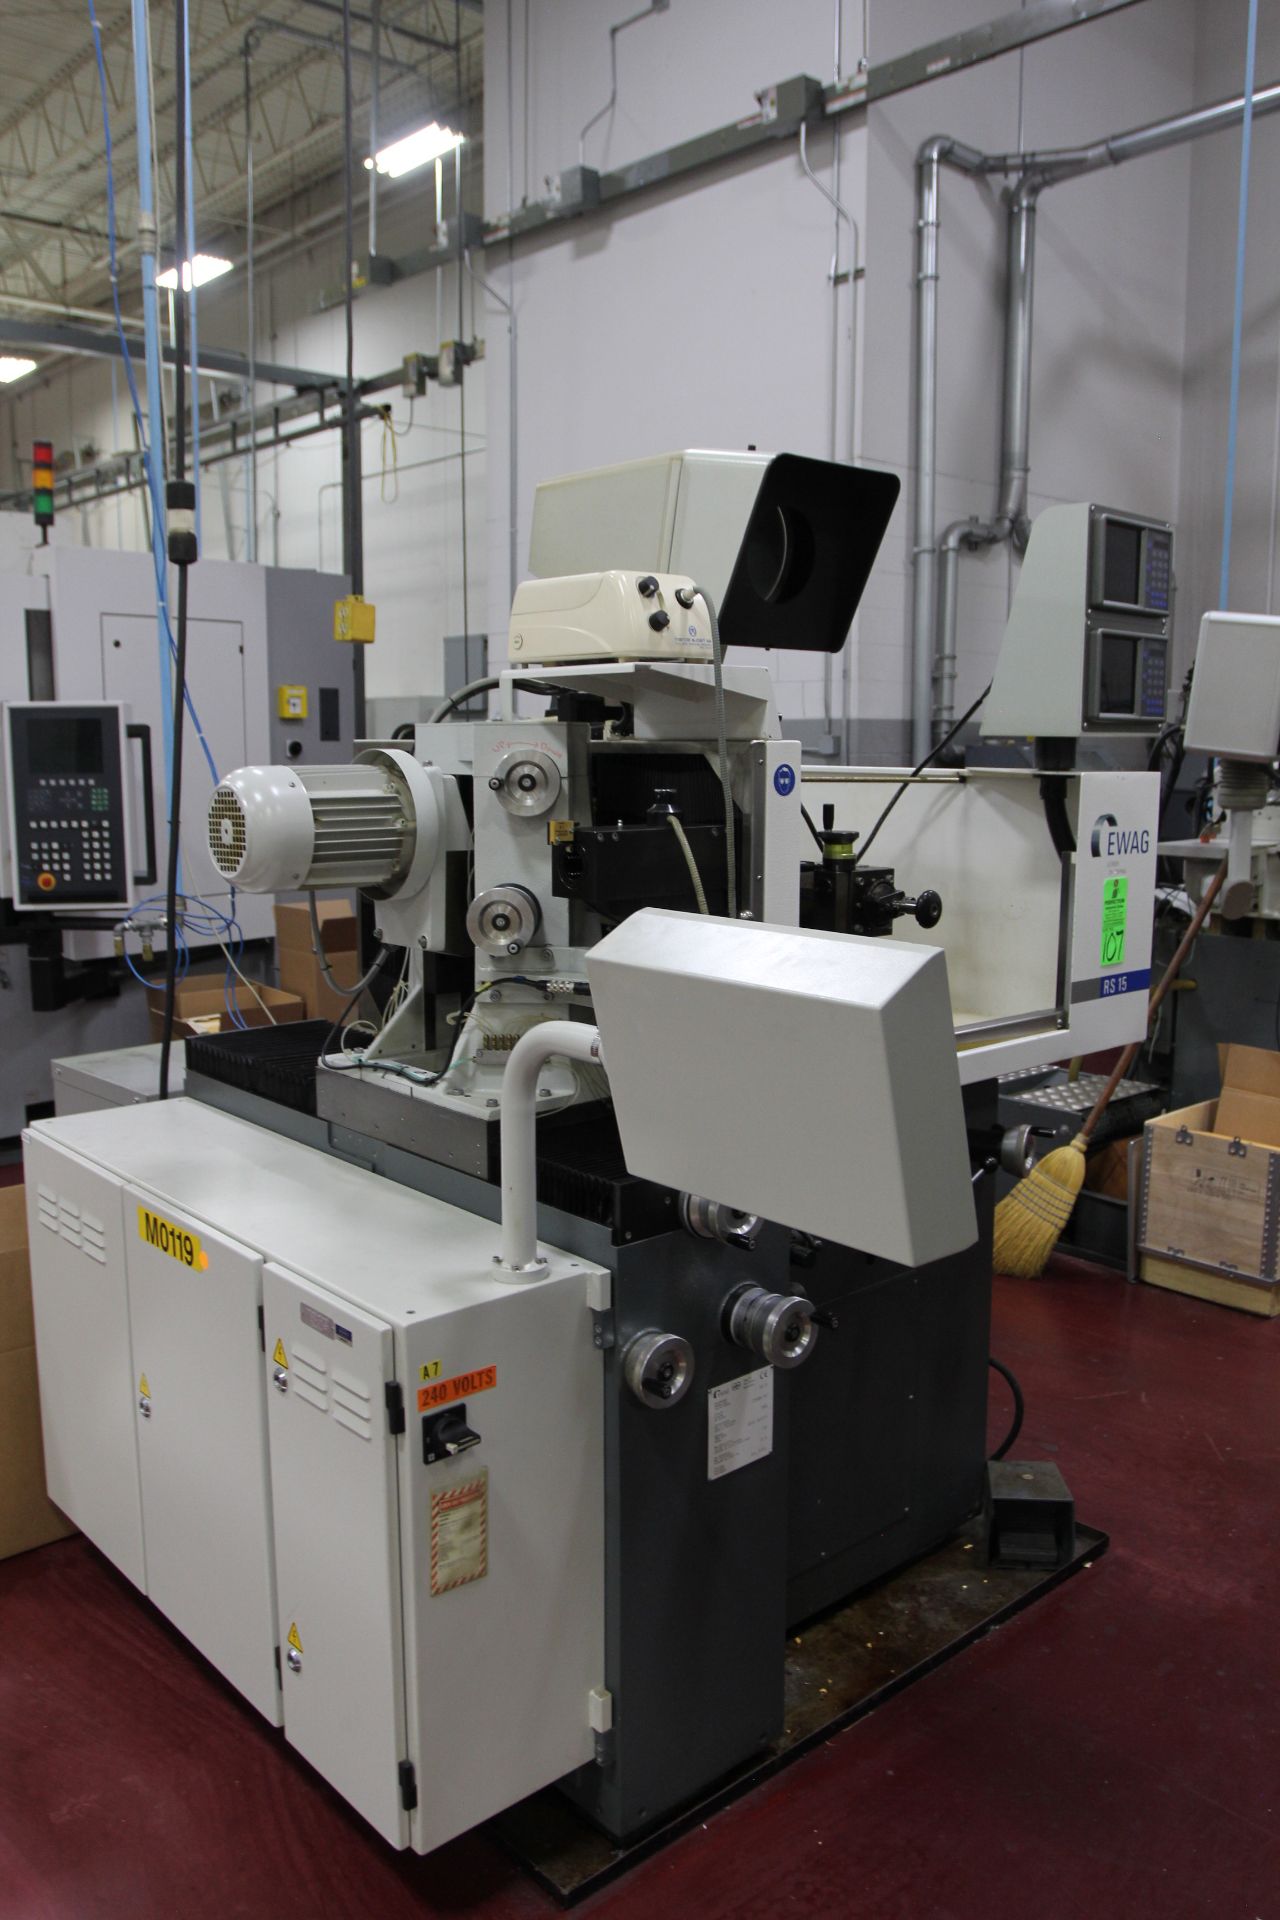 2006 EWAG RS15 UNIVERSAL 6 Axis PRECISION TOOL GRINDER, s/n 1150604.341, w/ (2) 3 Axis DRO’s, - Image 5 of 5